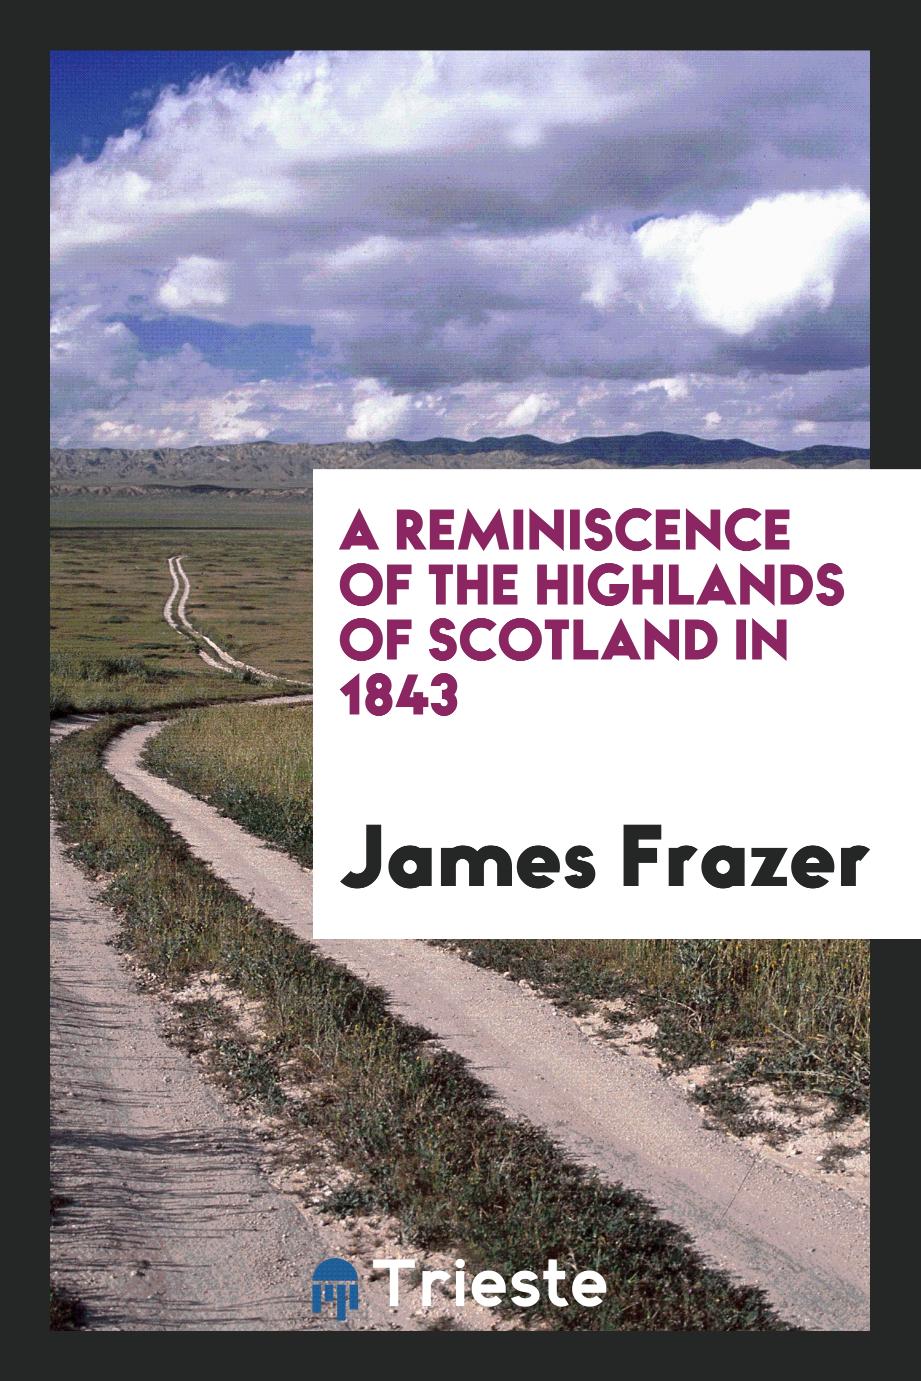 A Reminiscence of the Highlands of Scotland in 1843